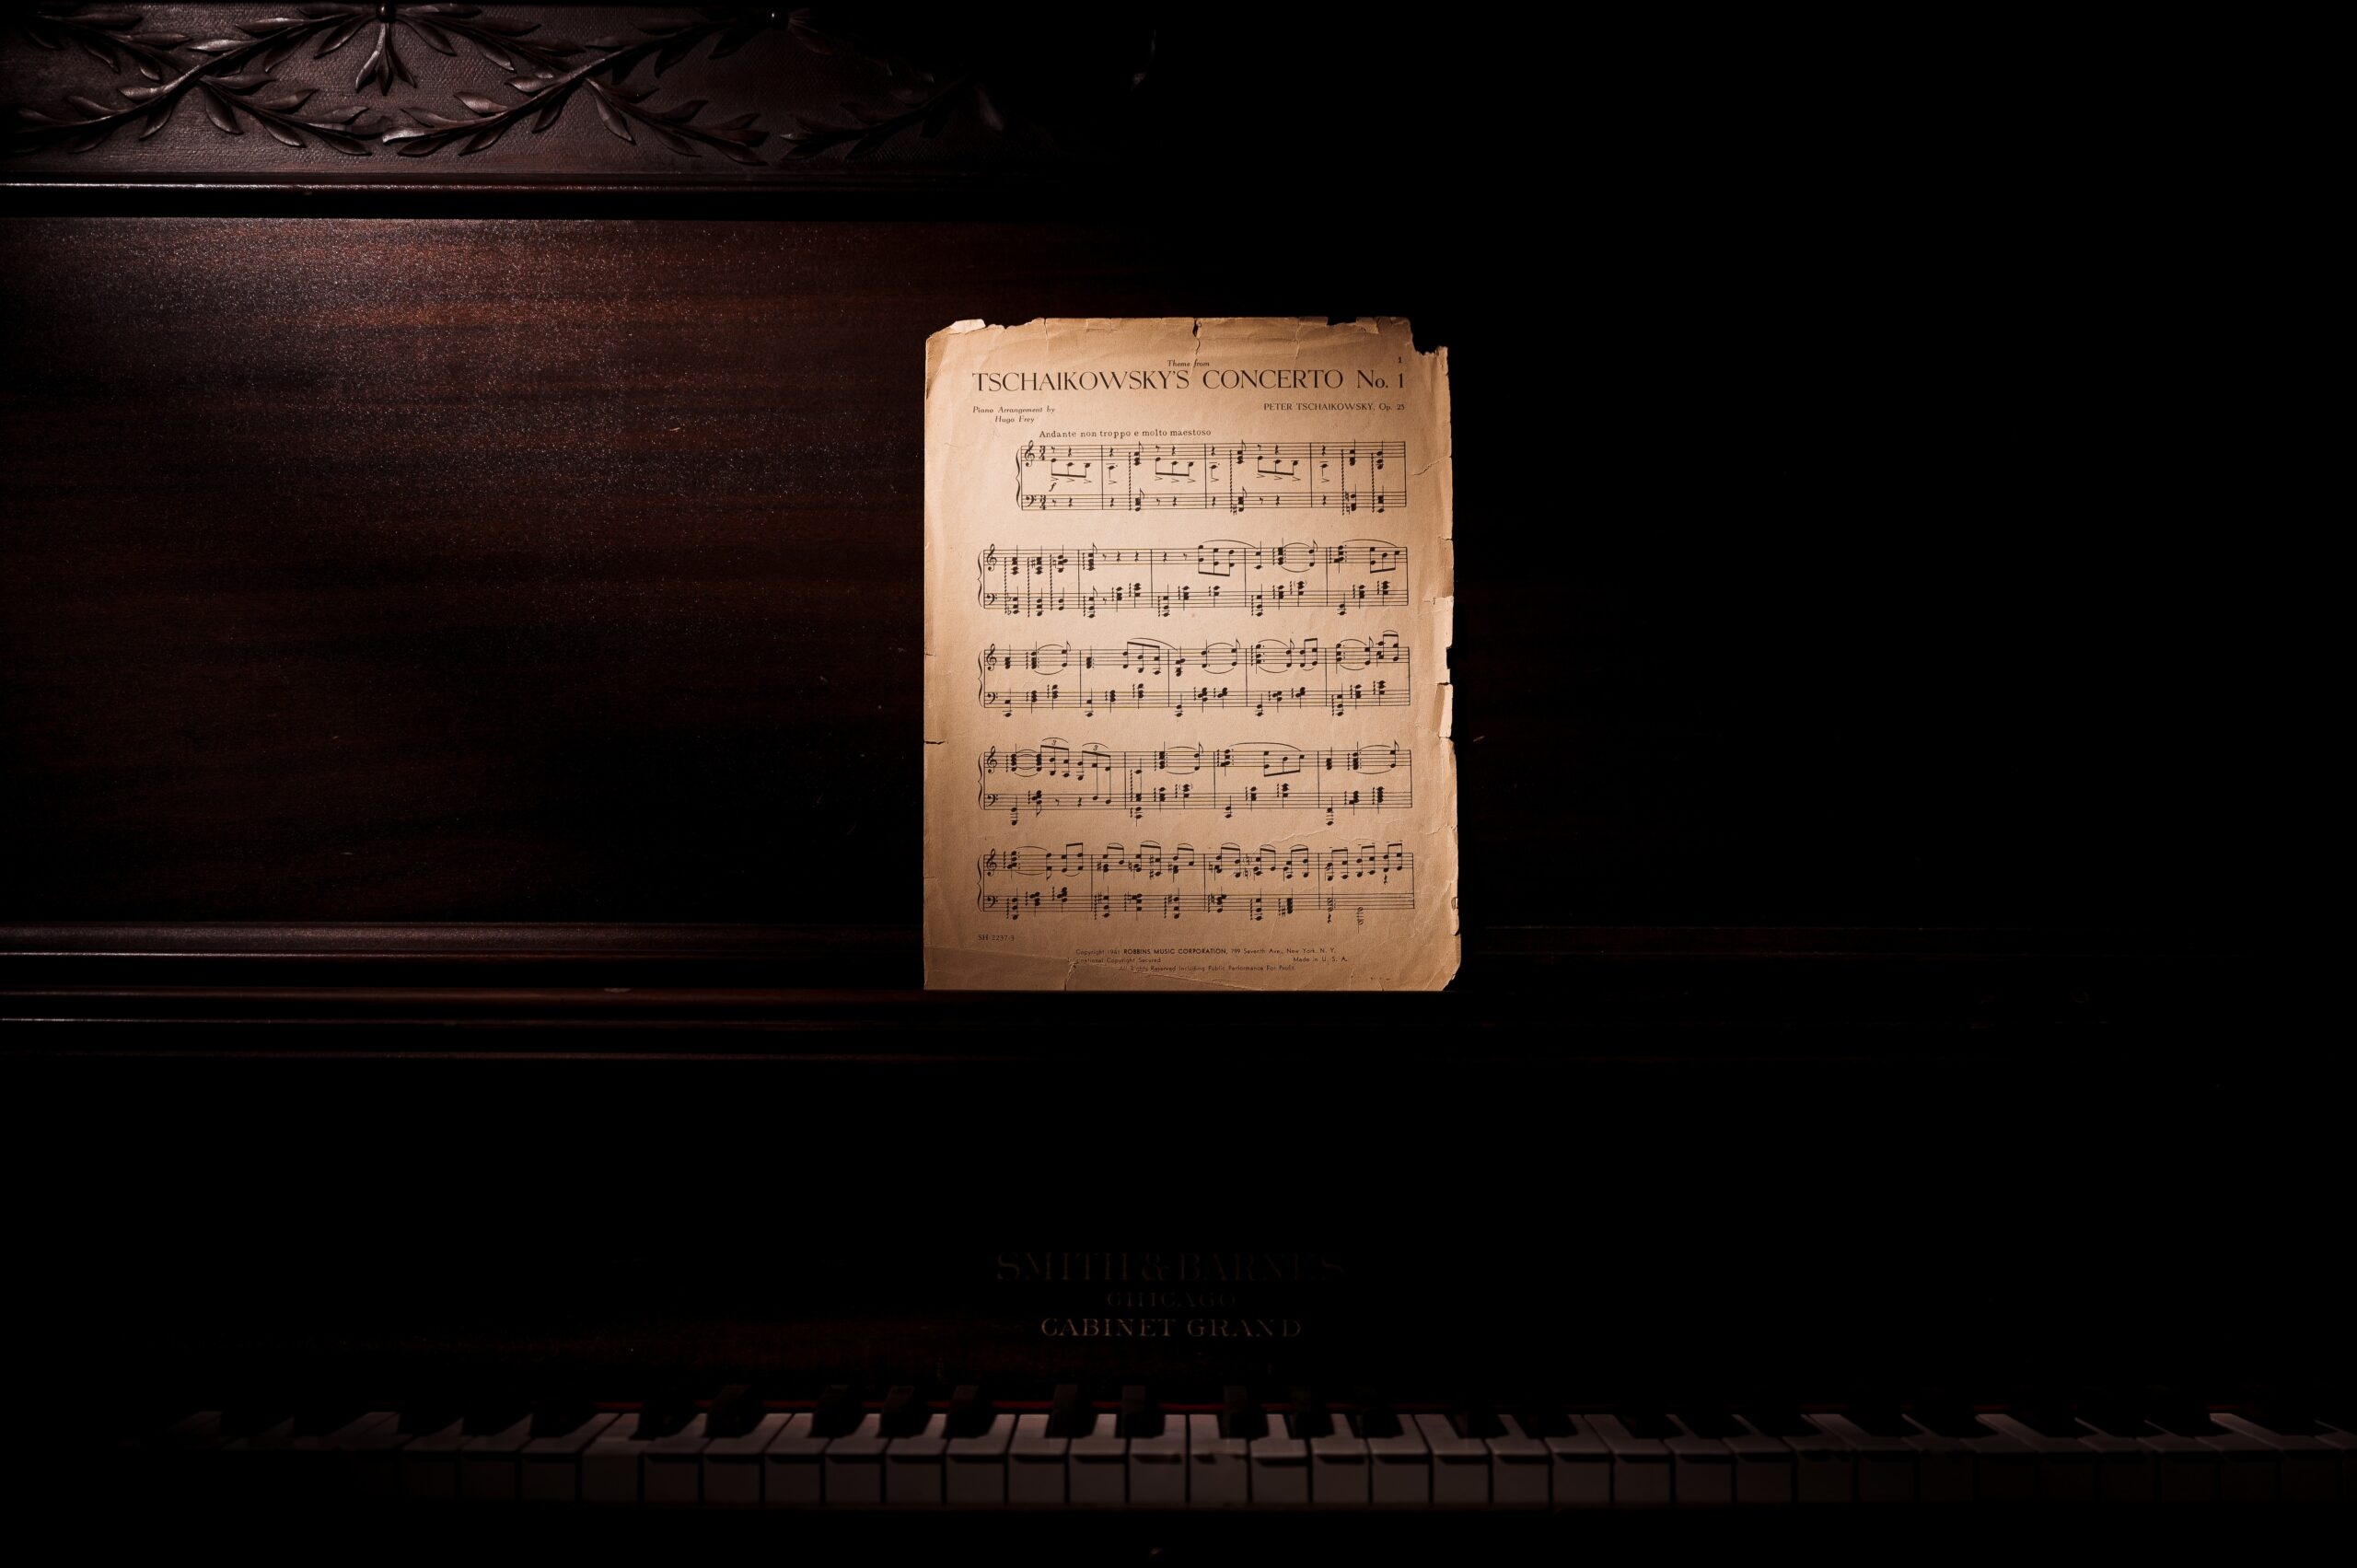 Piano: Jacob's Piano, Pyotr Ilyich Tchaikovsky, A Russian Composer Of The Romantic Period, Musical Notes. 2560x1710 HD Wallpaper.